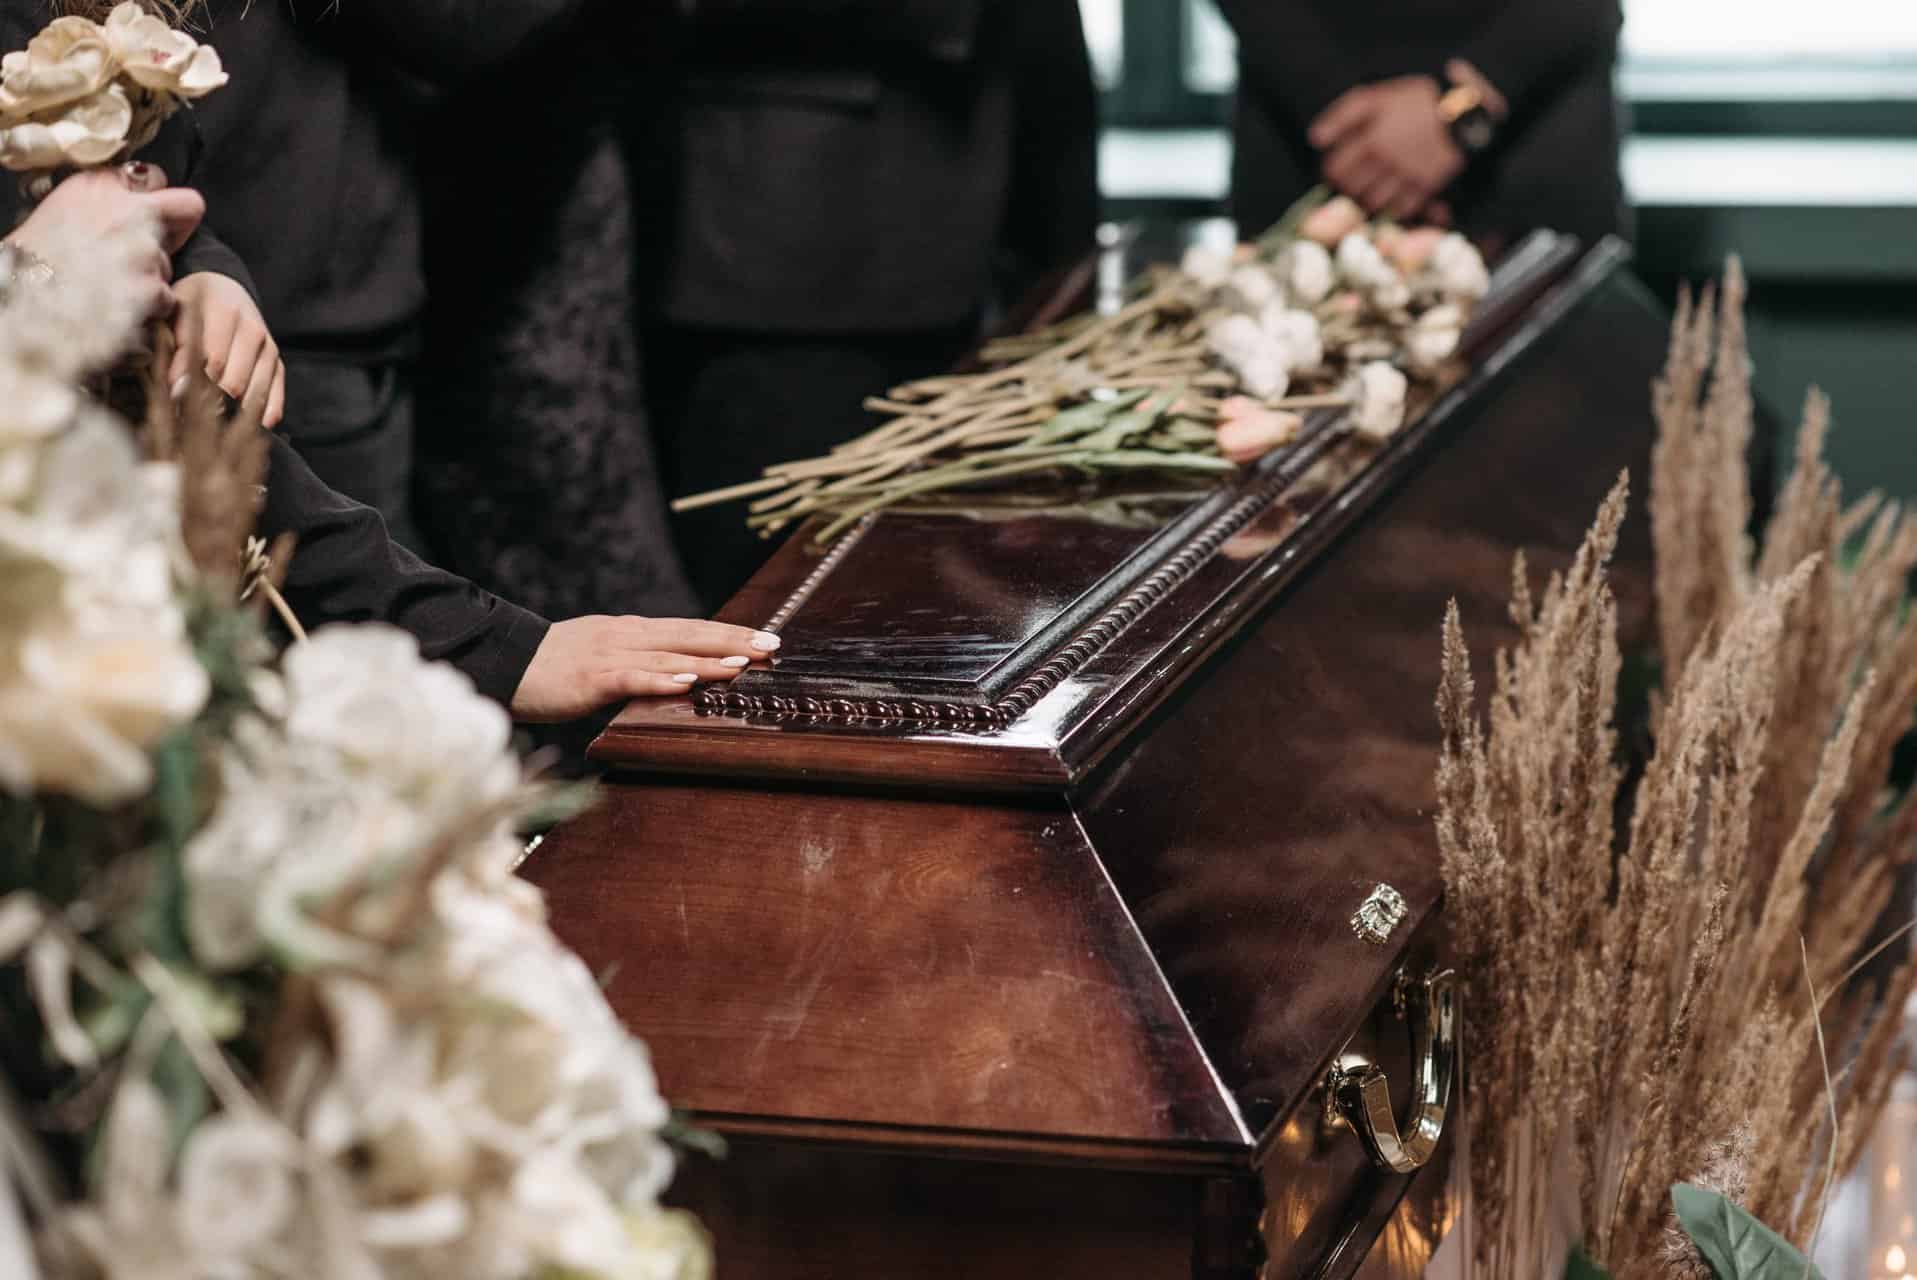 A Focus on What Matters: Creating an Intimate and Personal Simple Funeral